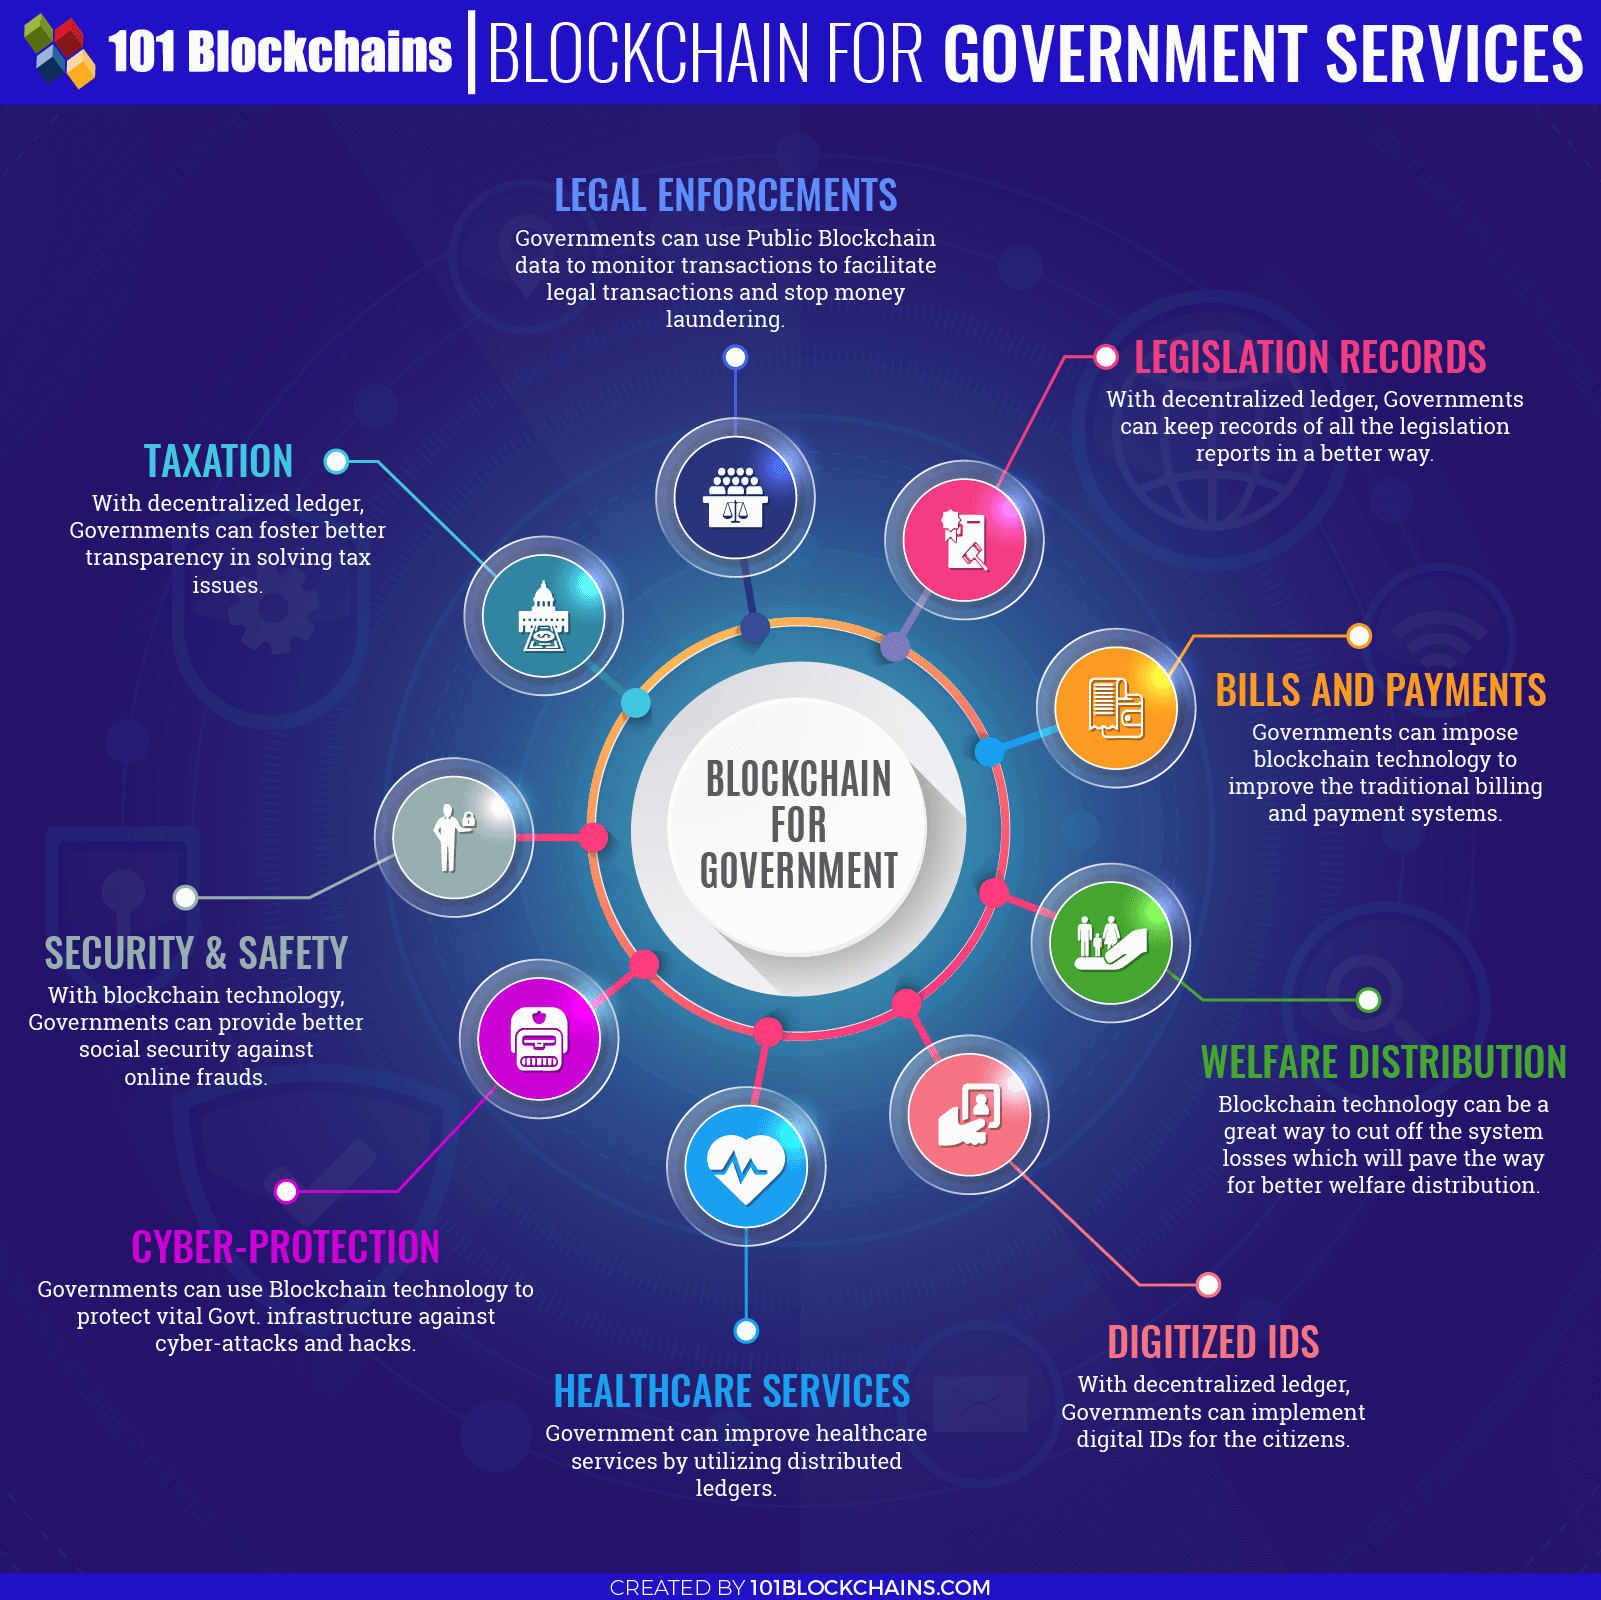 Indian Government’s Initiatives In Blockchain